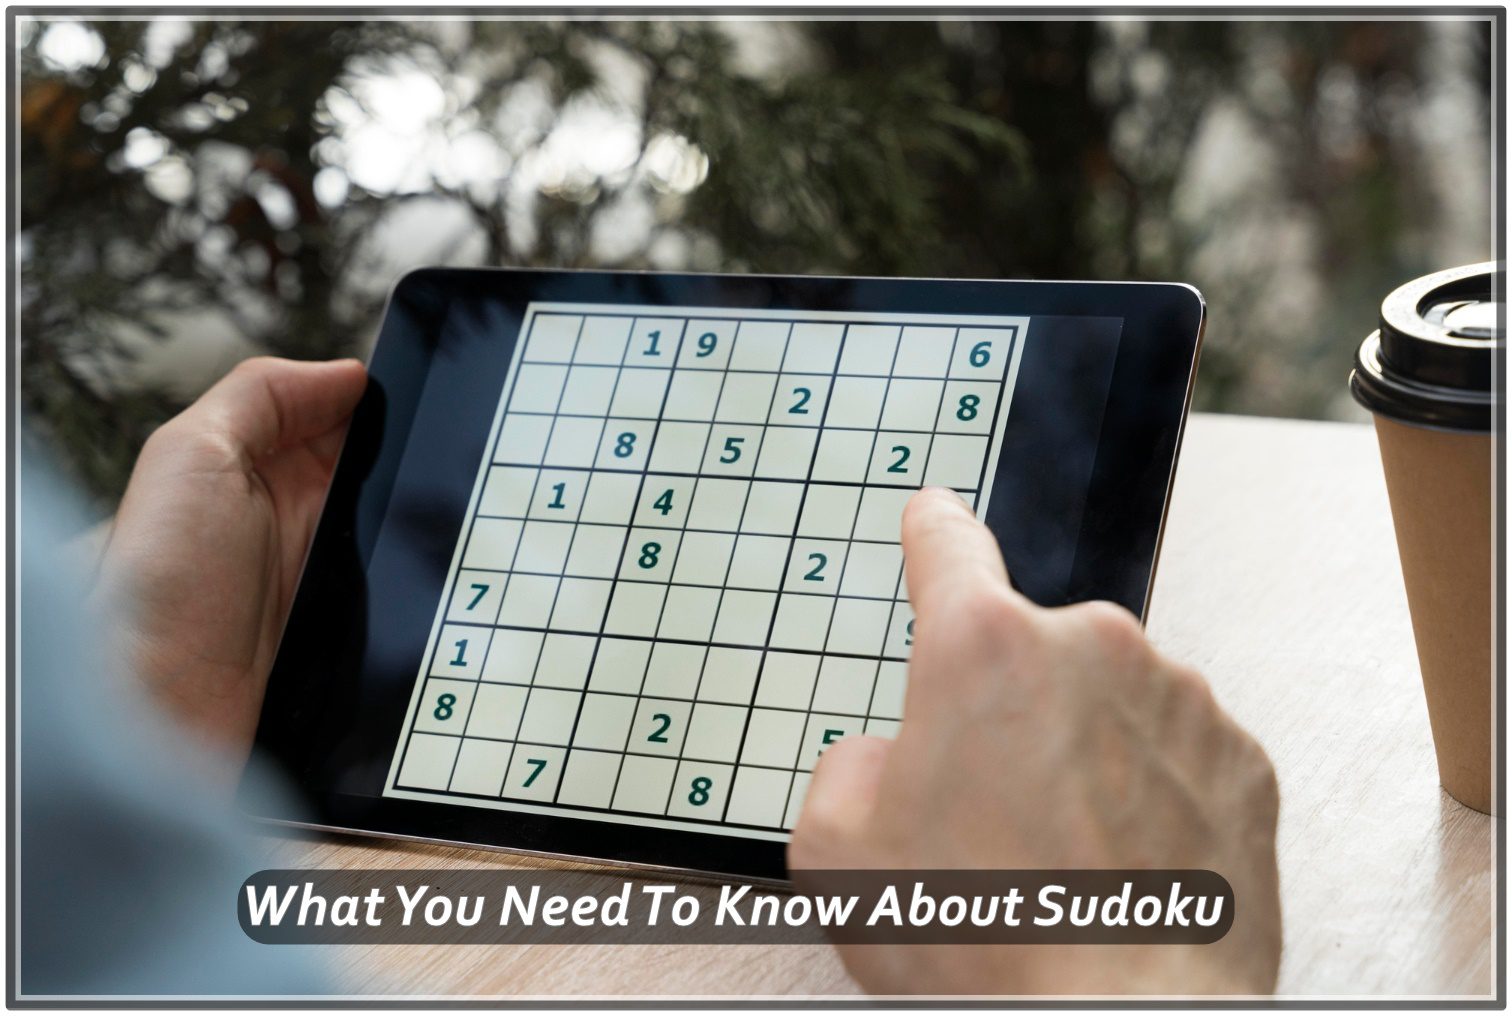 What You Need To Know About Sudoku